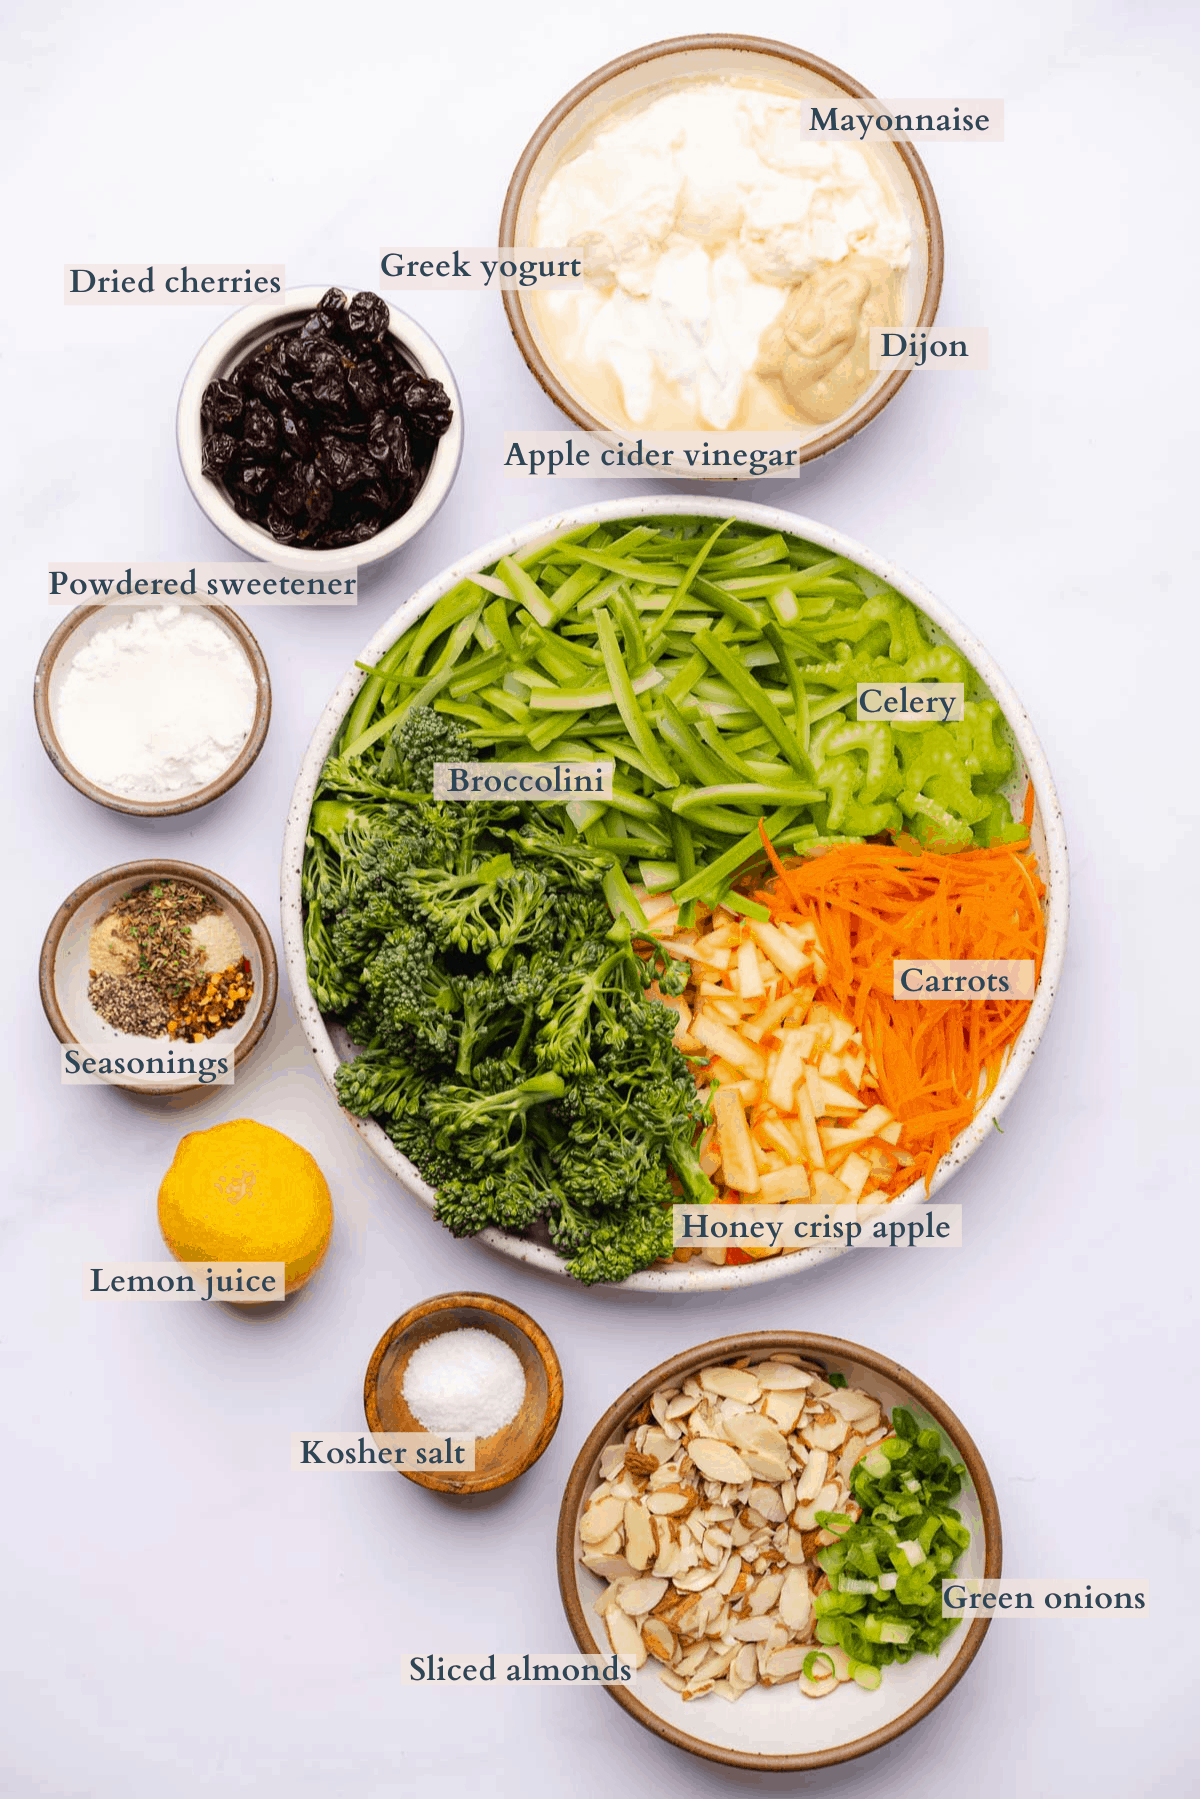 broccolini slaw ingredients graphic with text to denote different ingredients